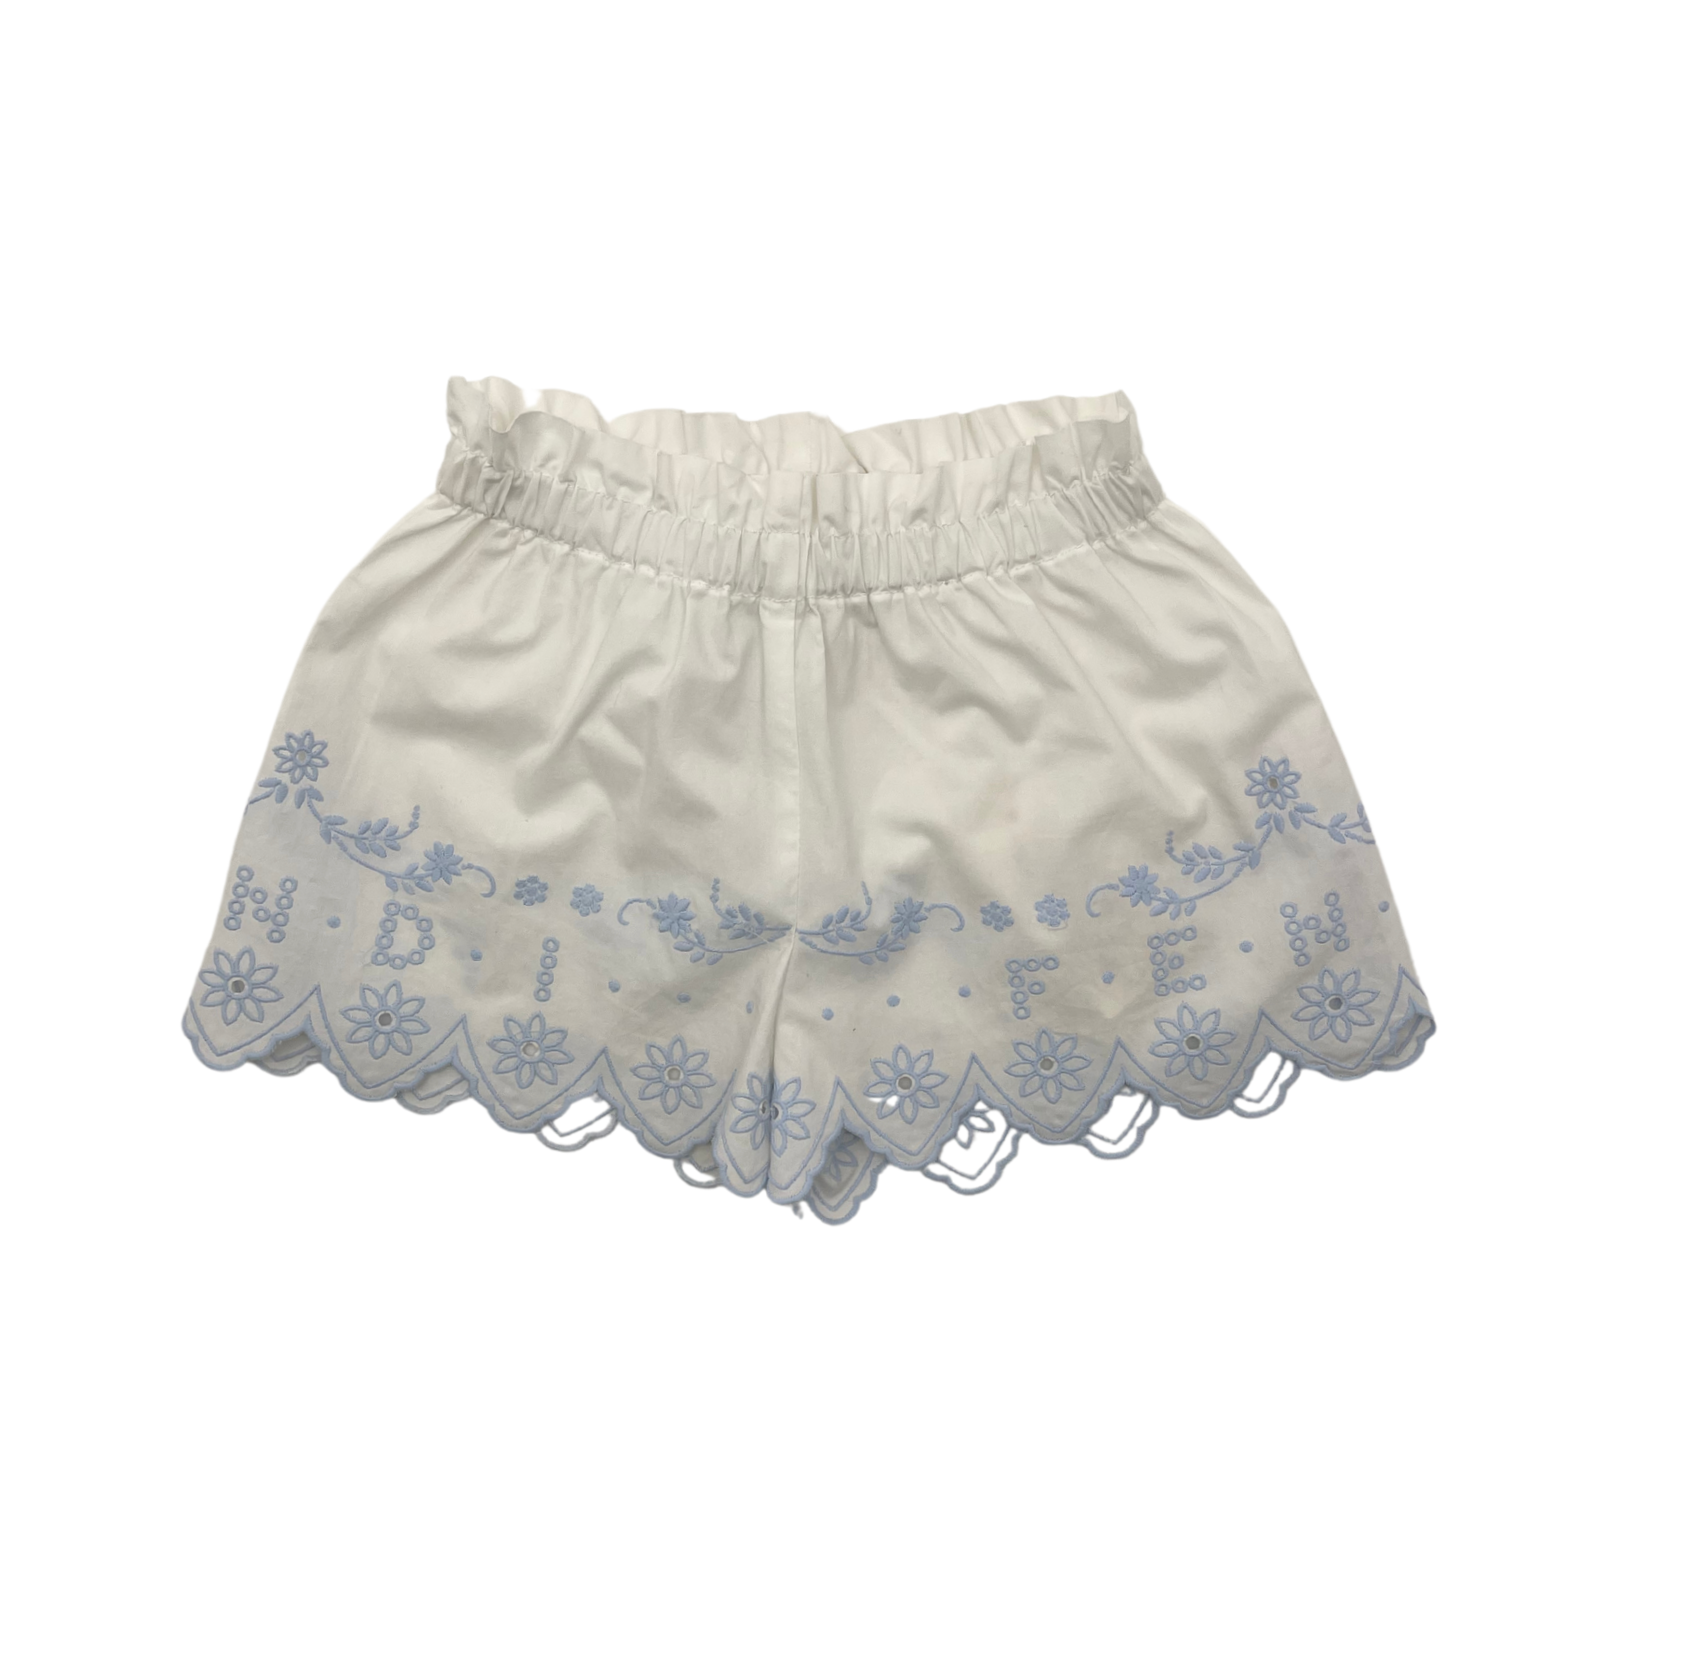 FENDI - White skirt with embroidery - 1 year old